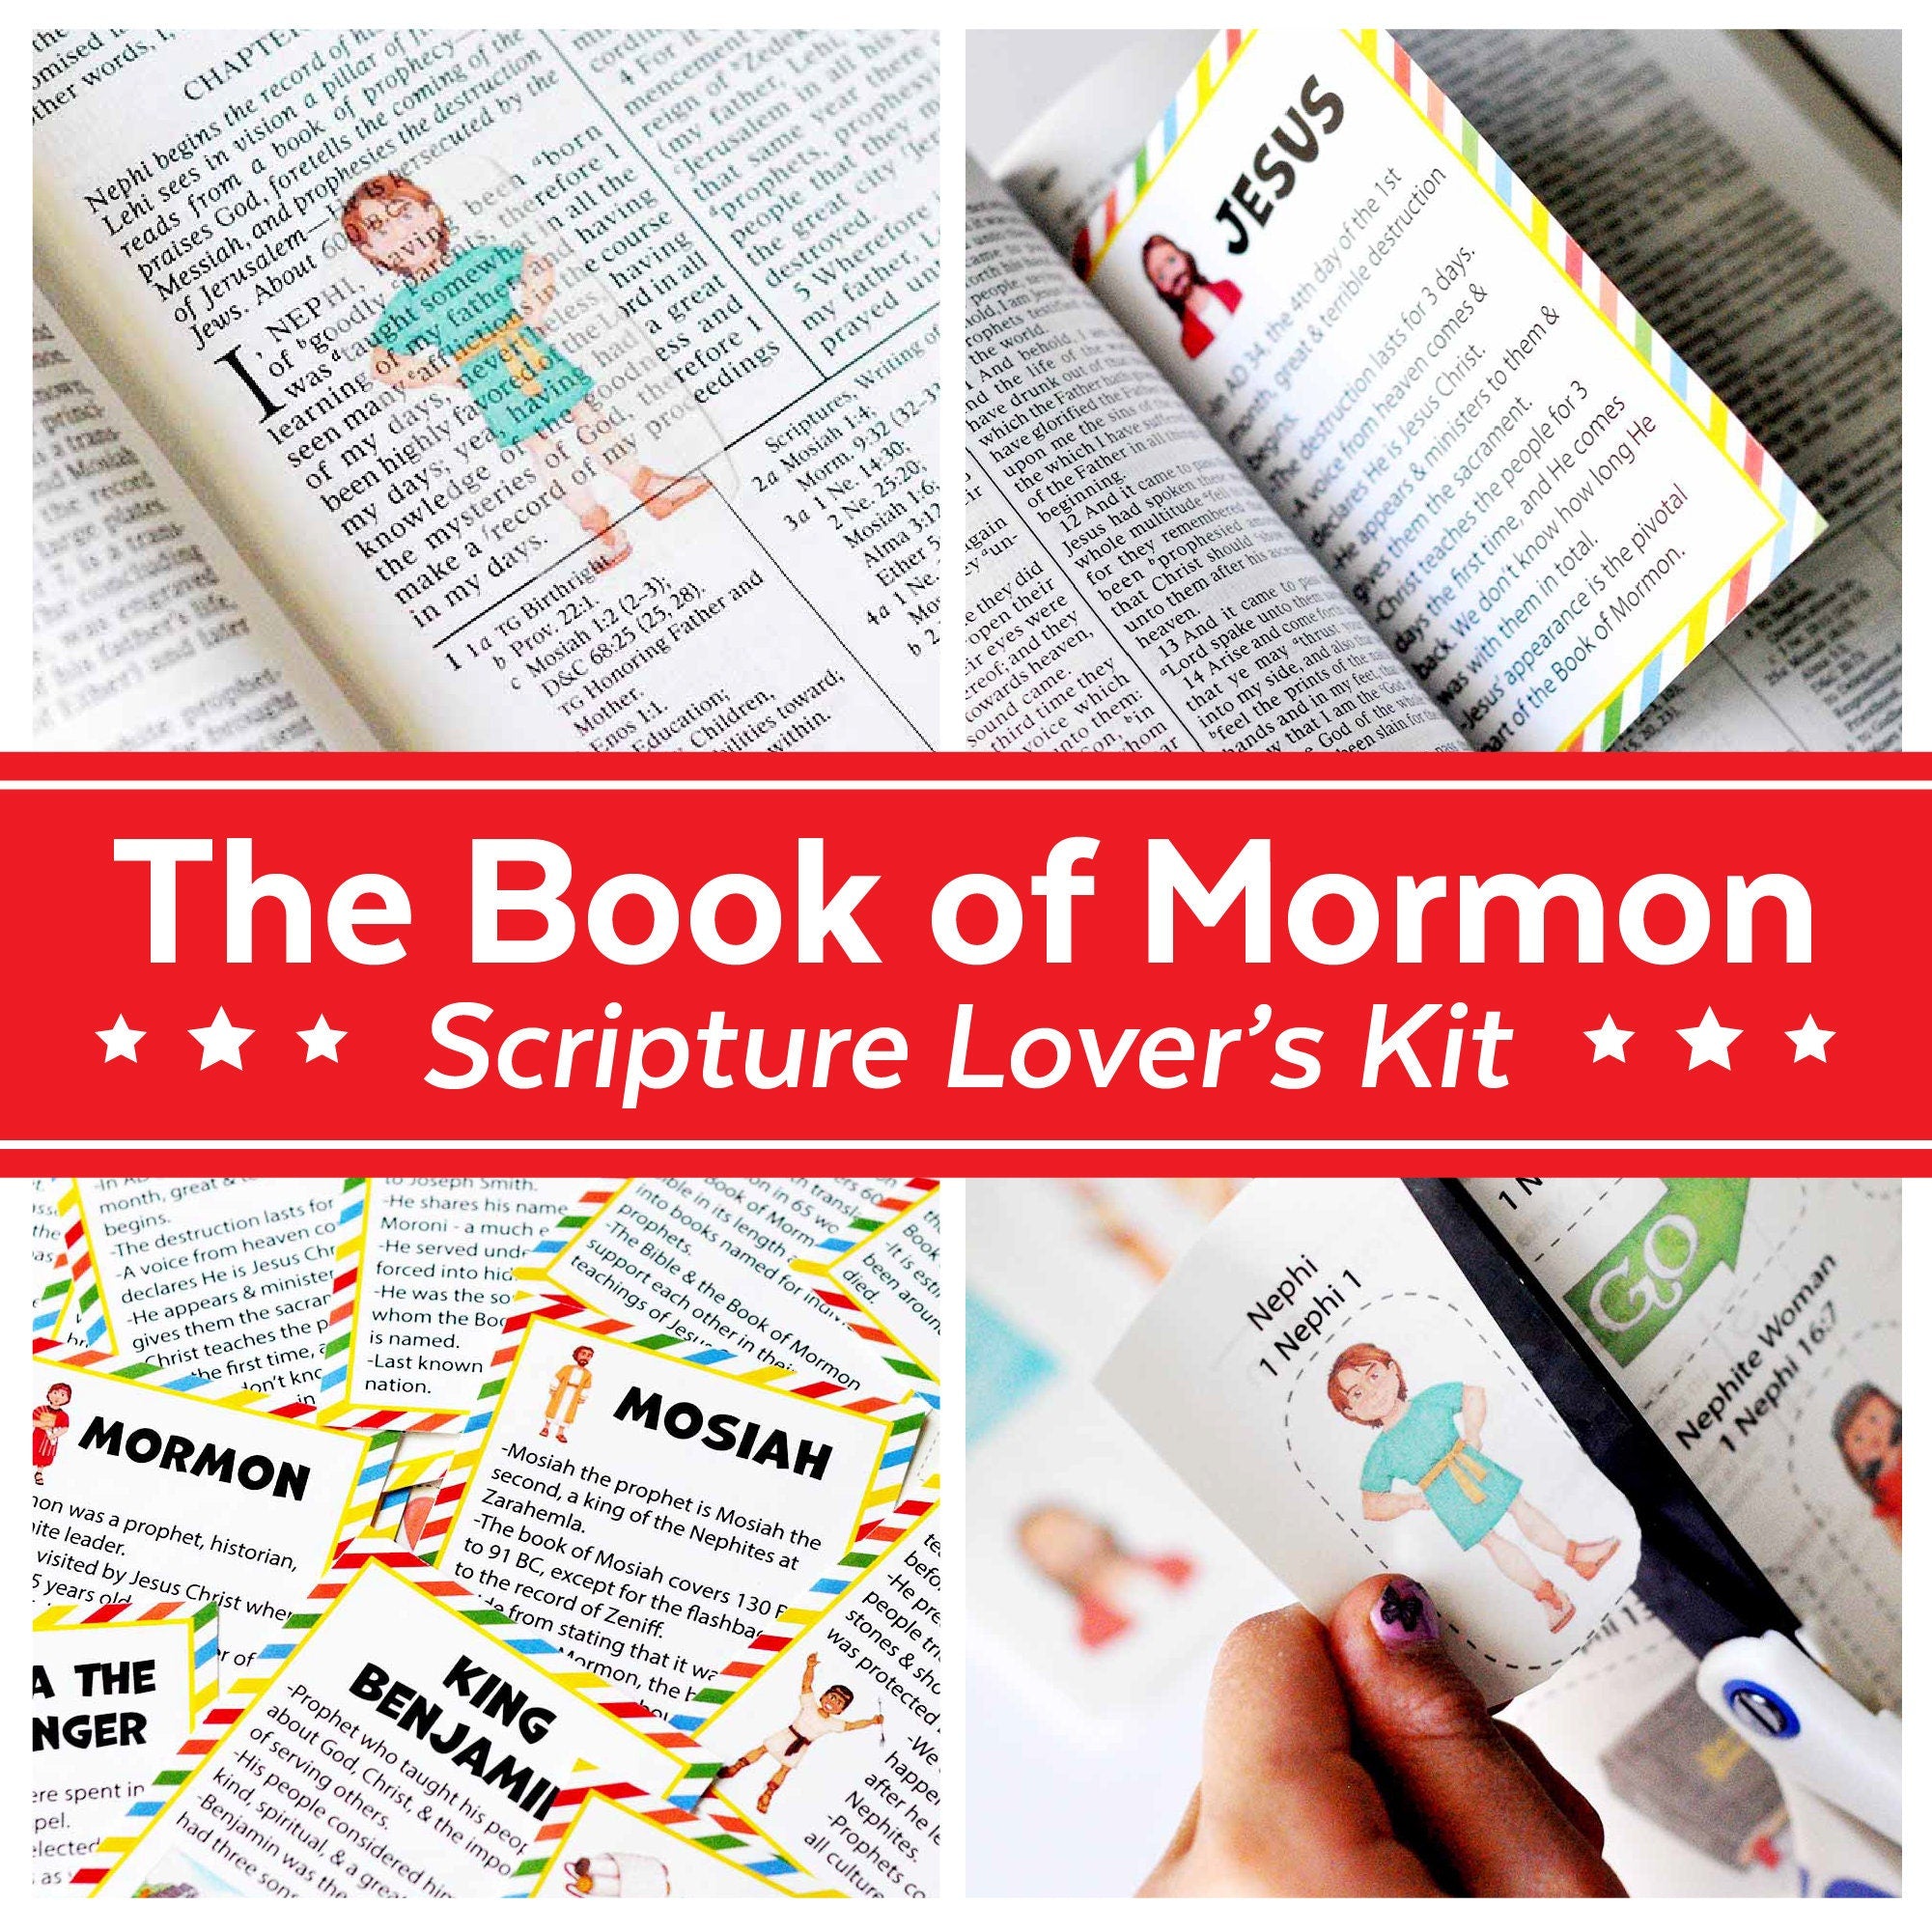 The Scripture Lover's Kit for Book of Mormon